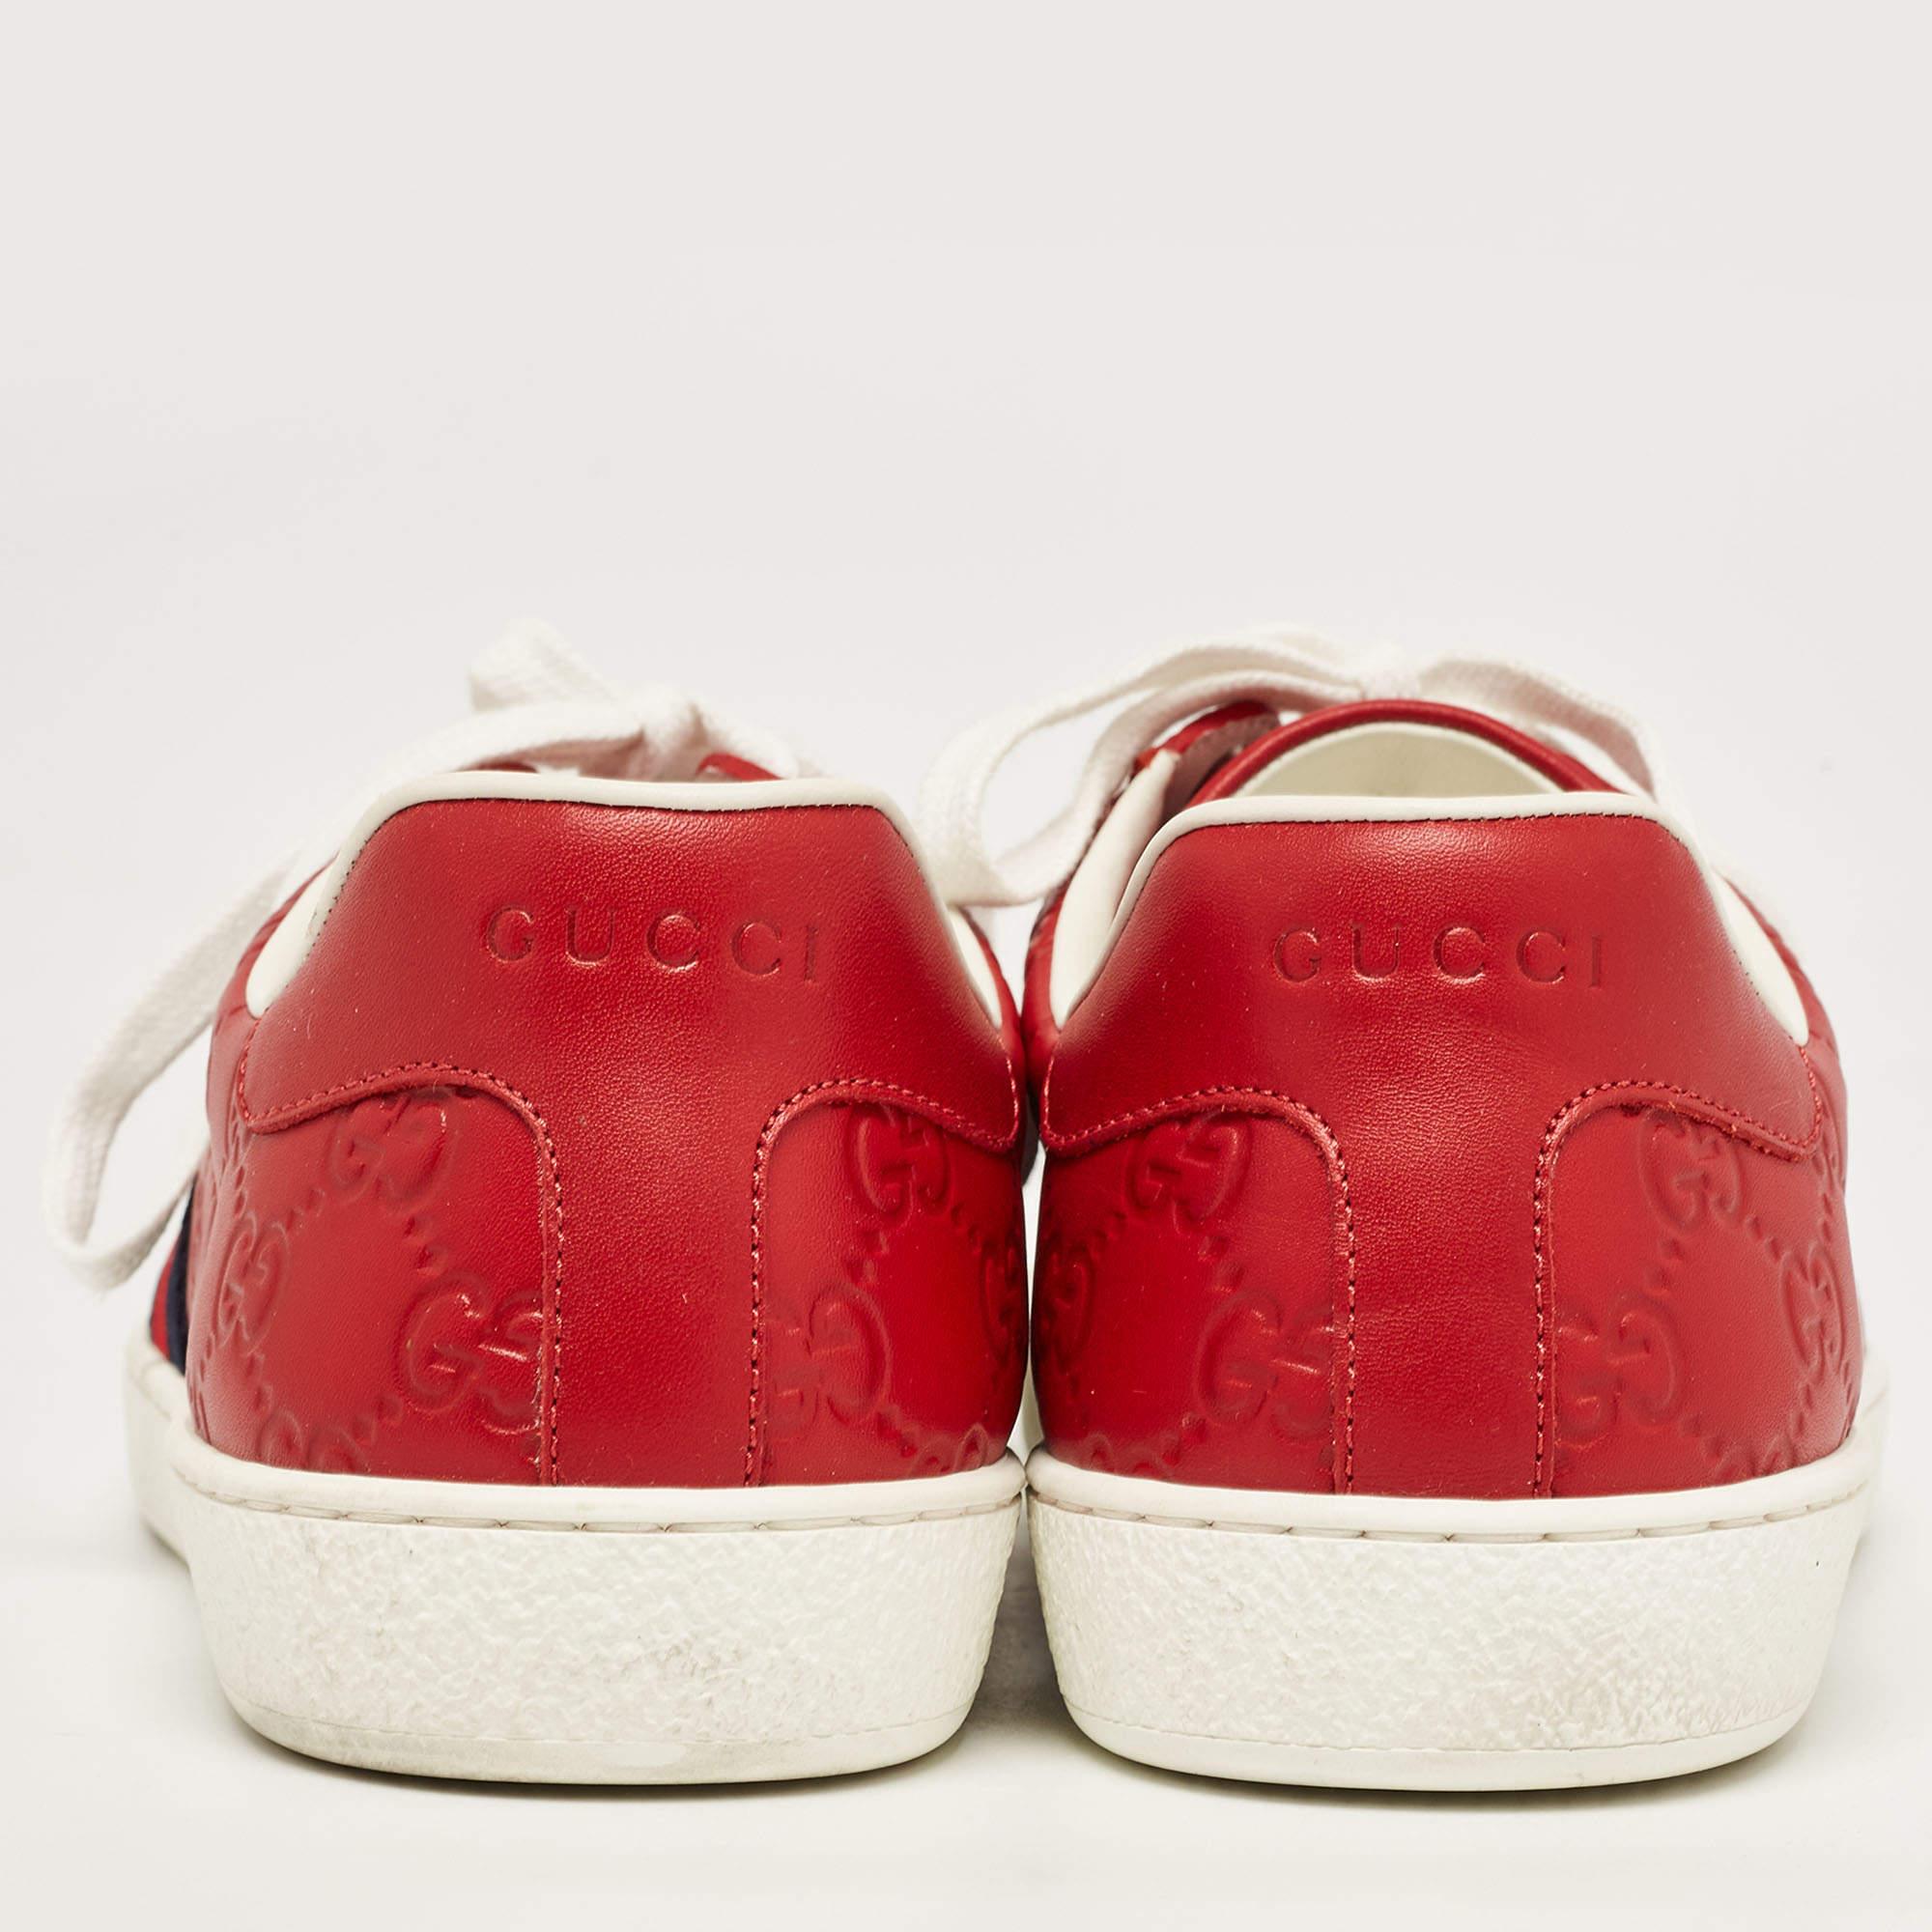 Gucci Red Guccissima Leather Ace Sneakers Size 41.5 For Sale 1